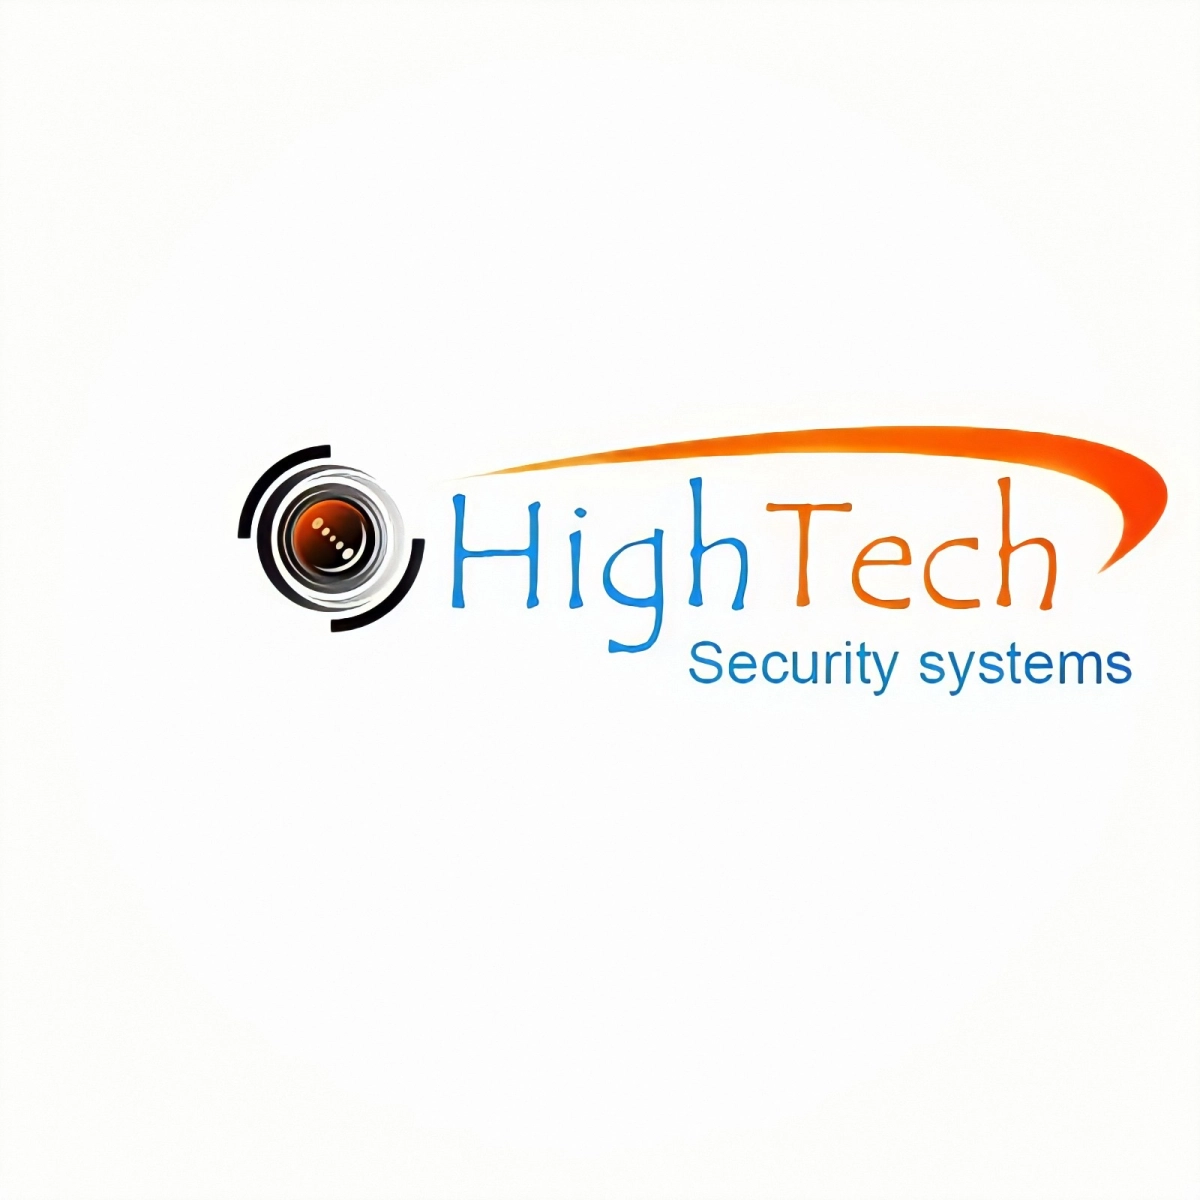 Hightech security systemss achtergrond